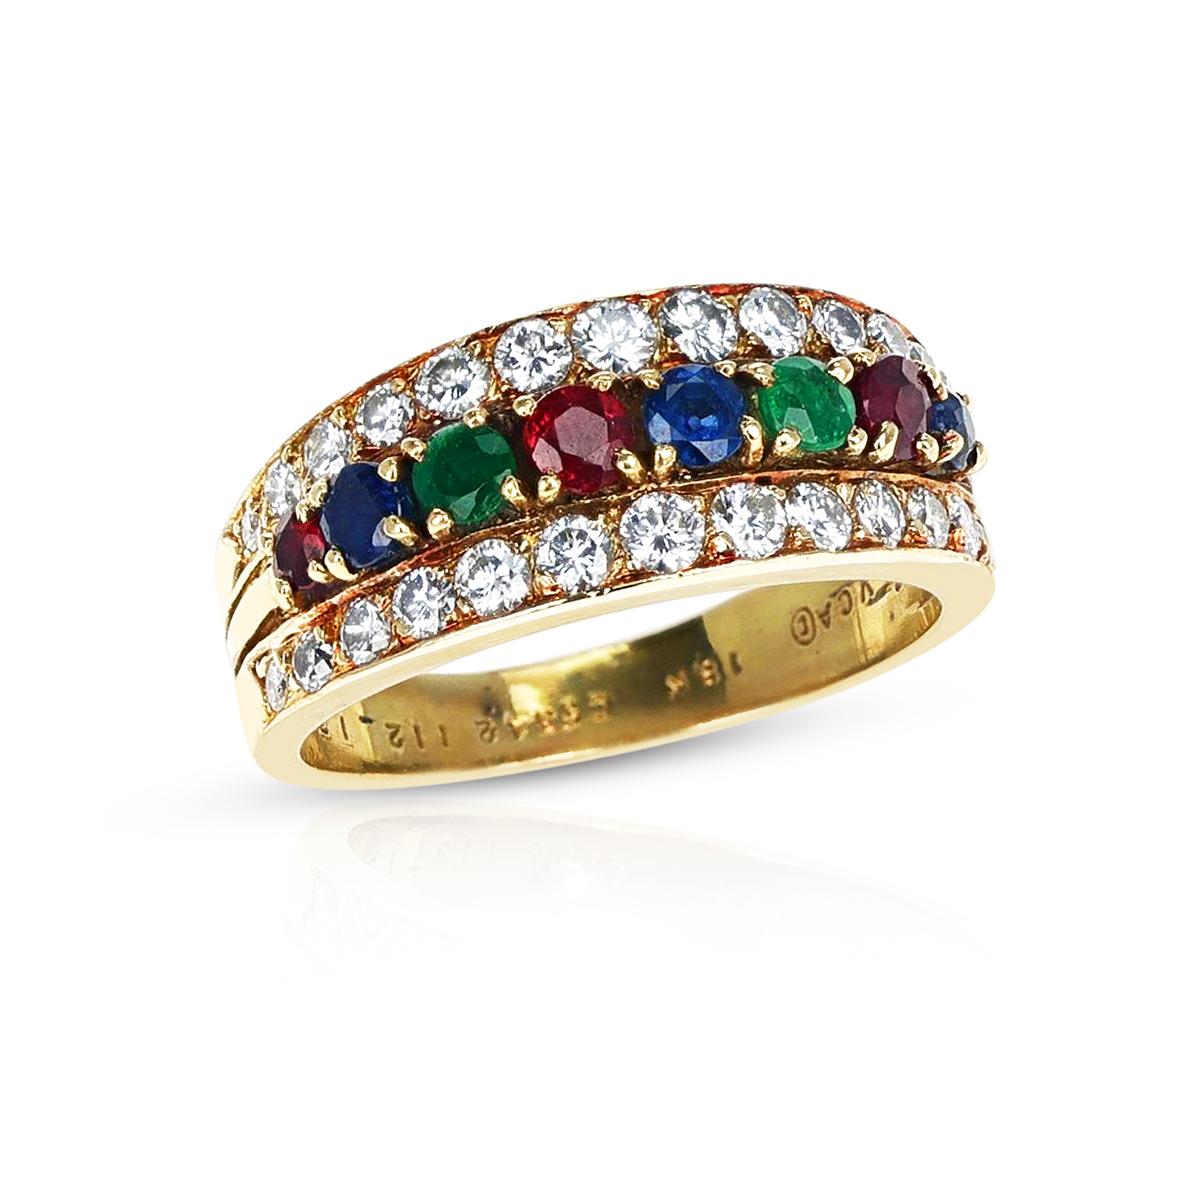 A Van Cleef & Arpels Ruby, Emerald, Sapphire and Diamond Ring made in 18 Karat Yellow Gold. The ring size is US 5.75 and the weight of the ring is 5.10 grams. 
